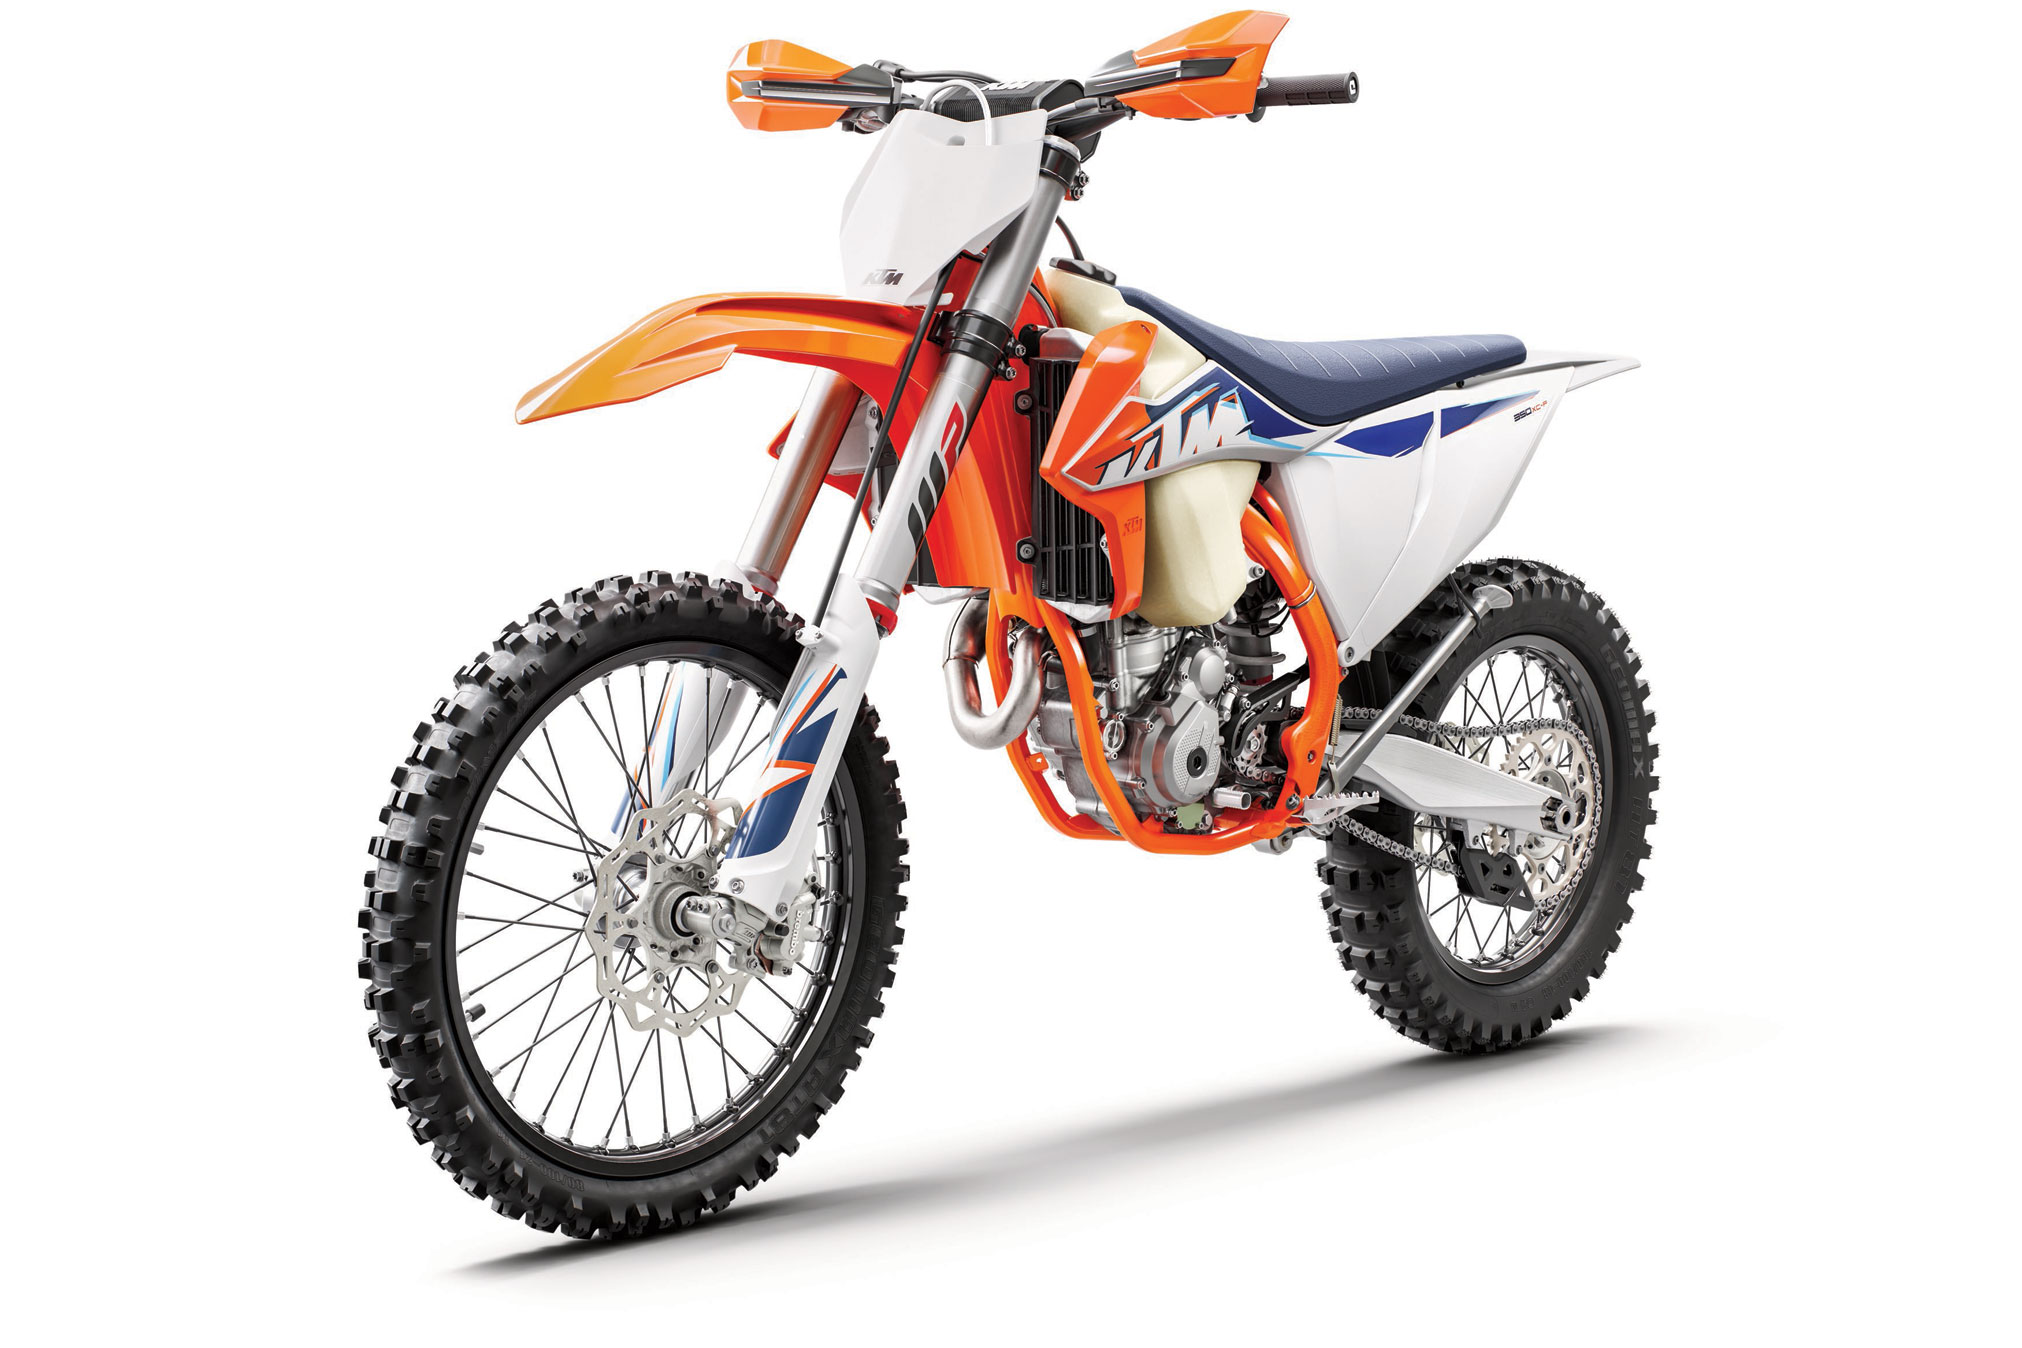 2020 KTM 350 XCF-W Guide • Total Motorcycle